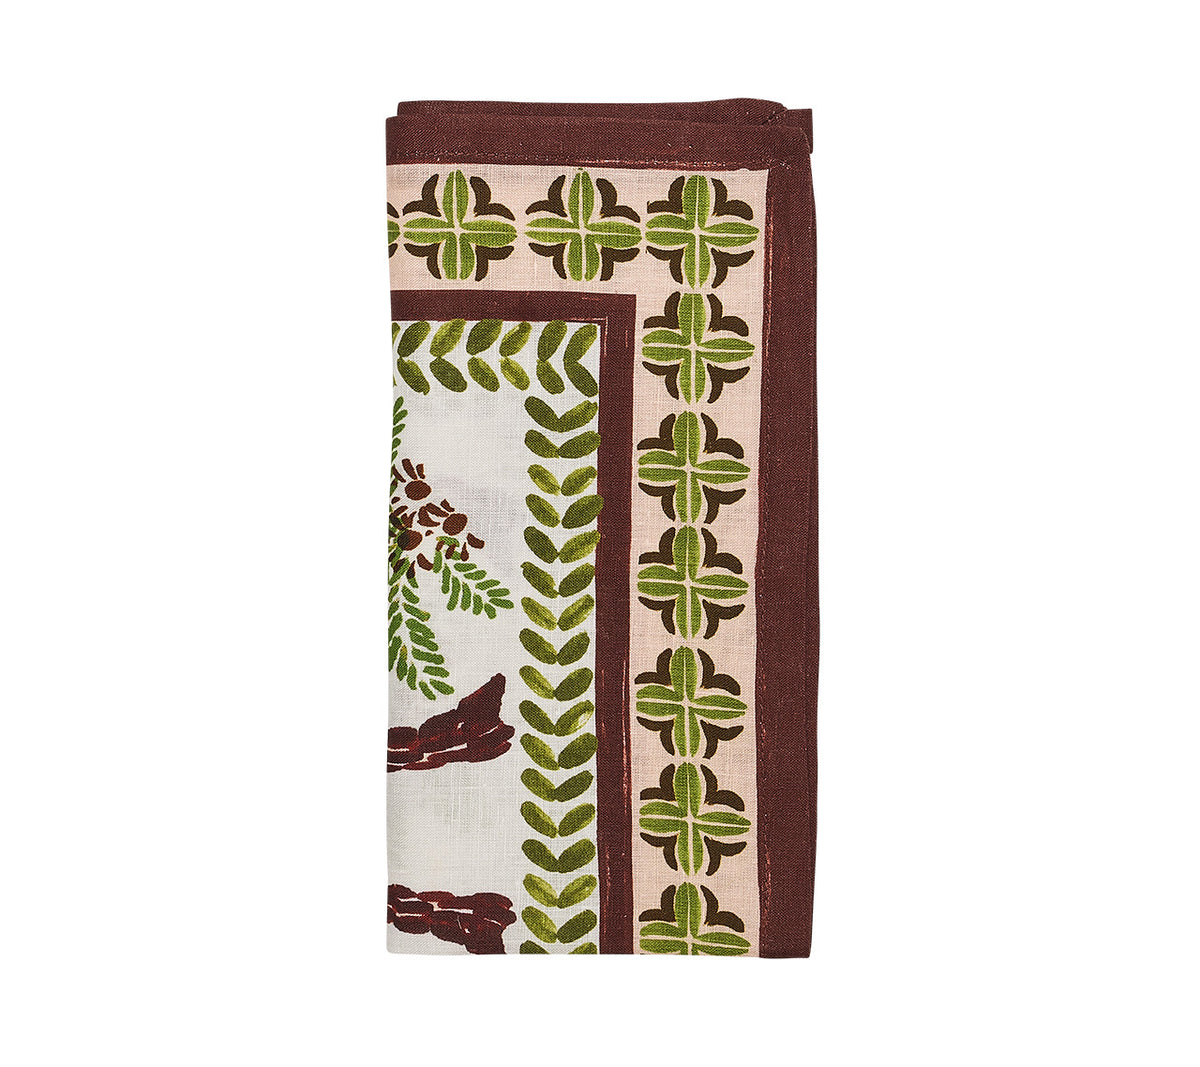 Oasis Napkin in Ivory, Green & Brown, Set of 4